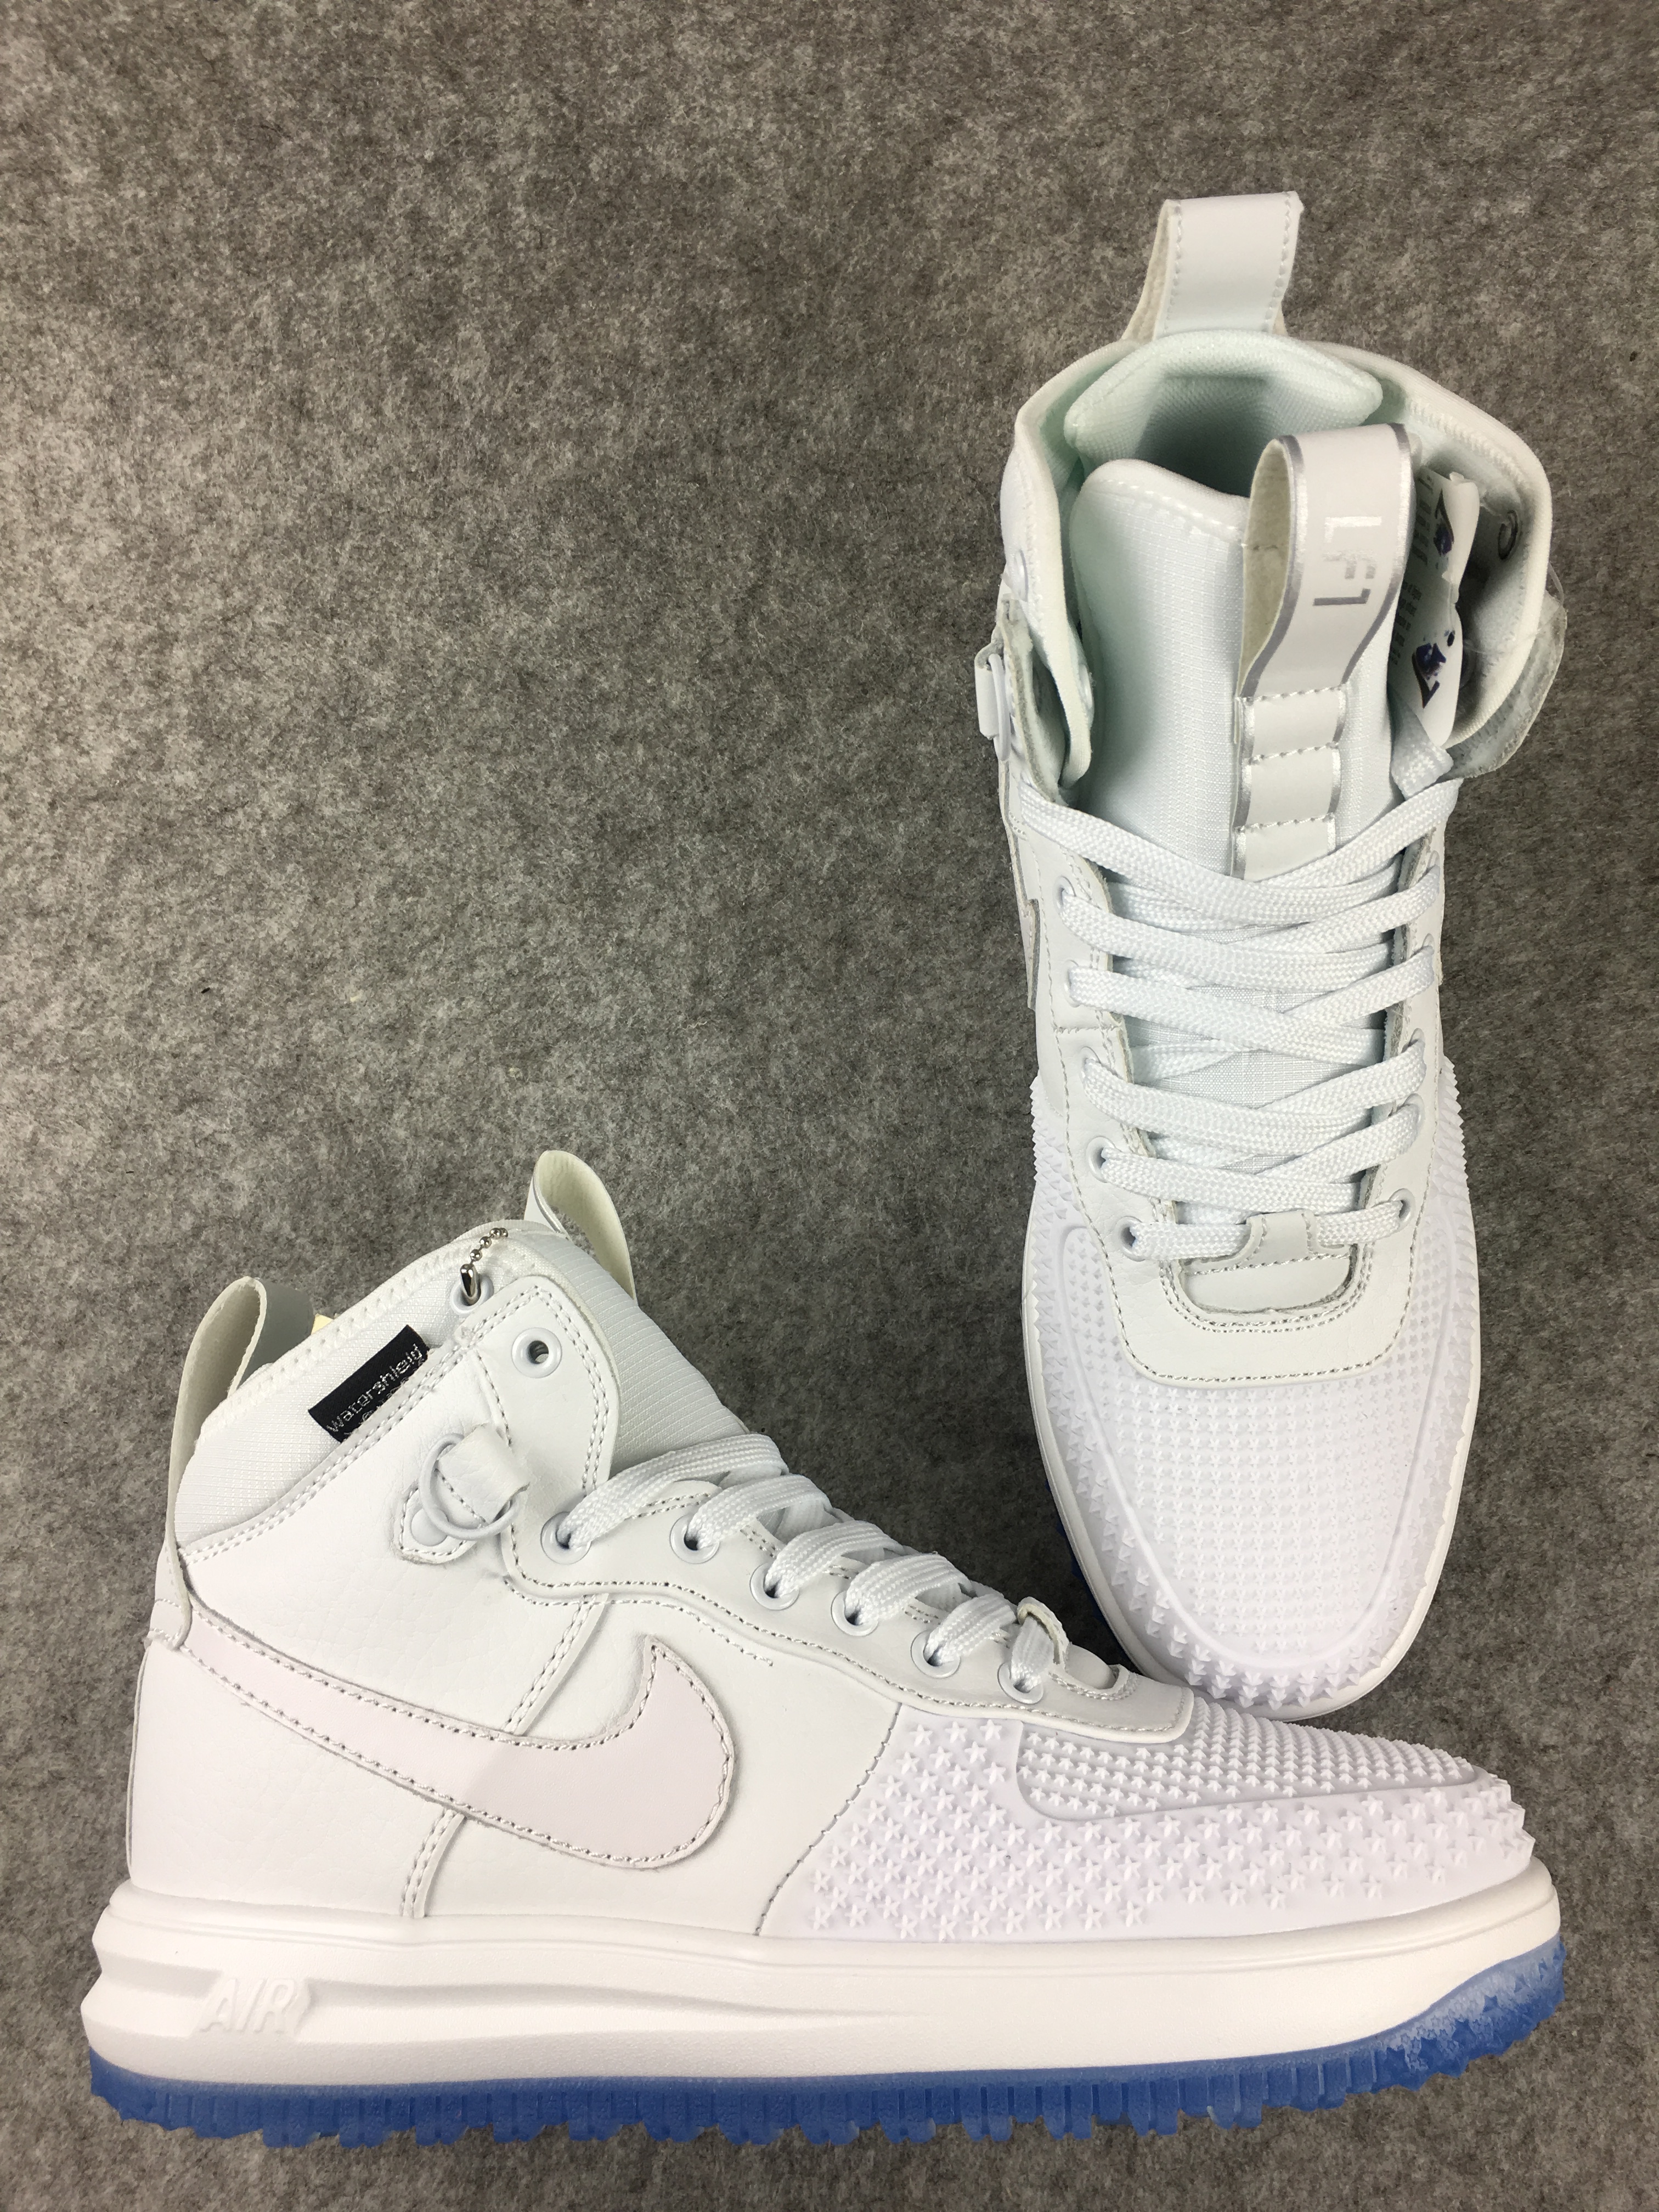 New Nike Lunar Force 1 High All White Shoes - Click Image to Close